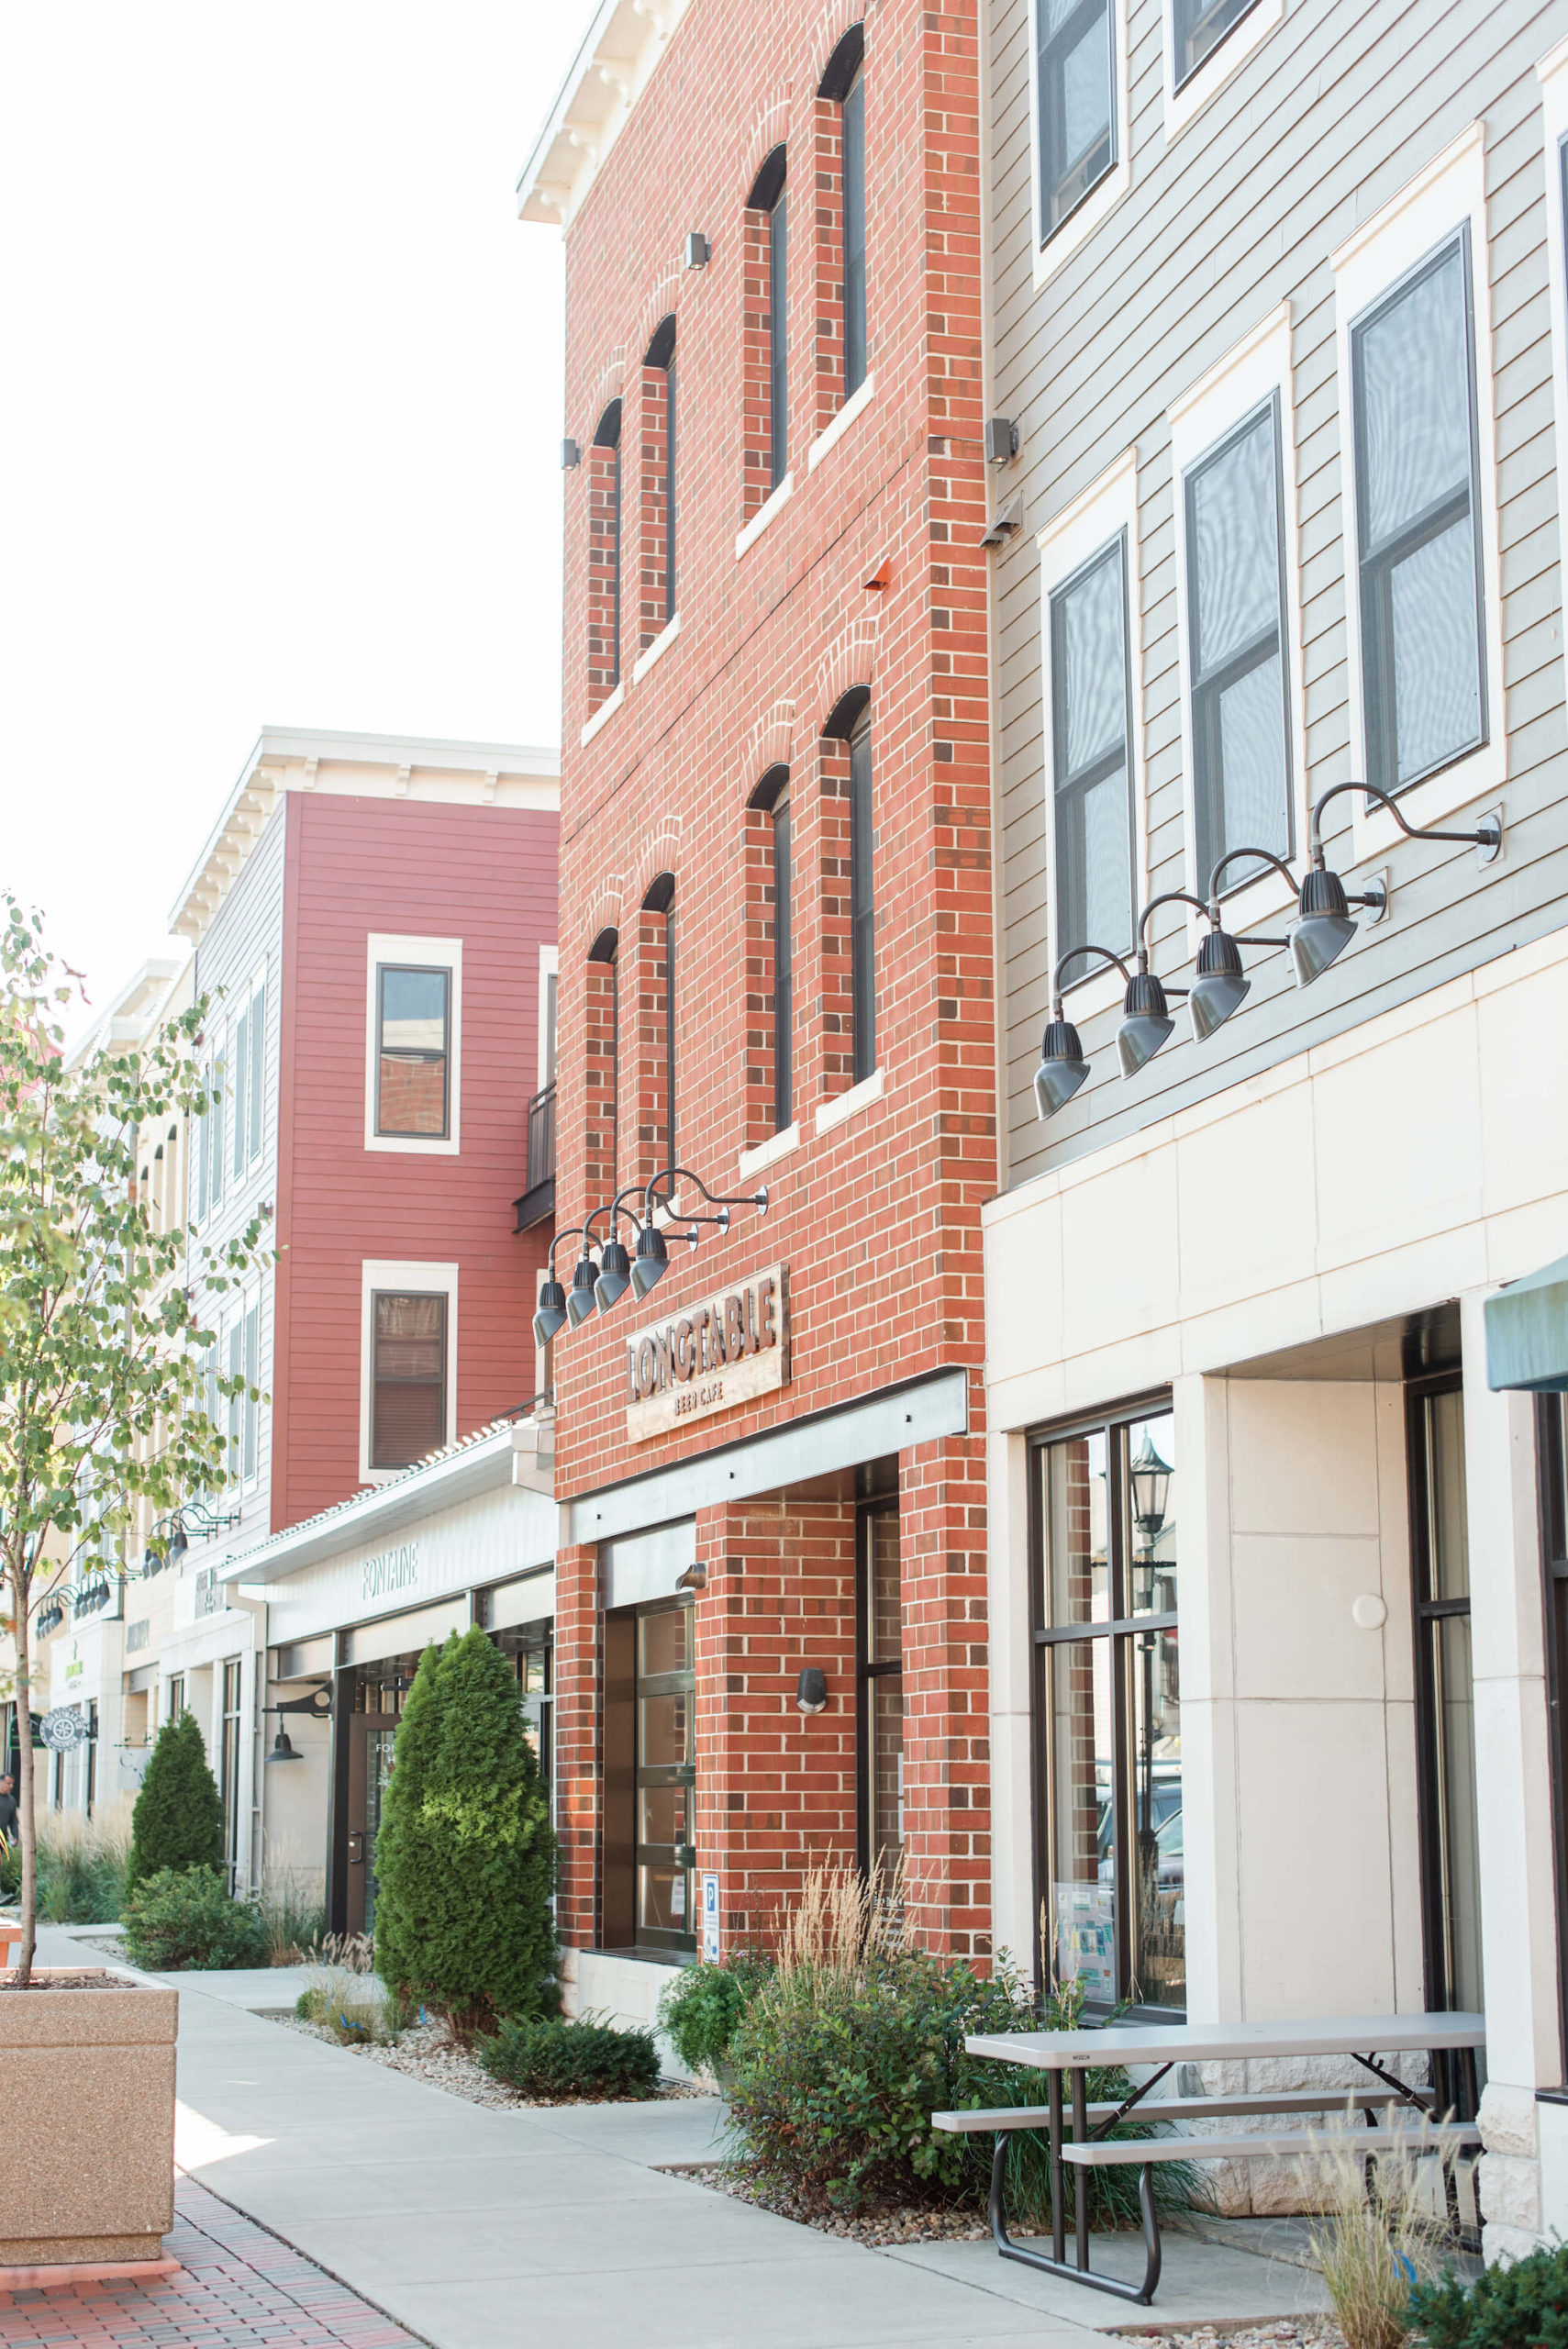 Shops in downtown Middleton, one of Madison's best places to live